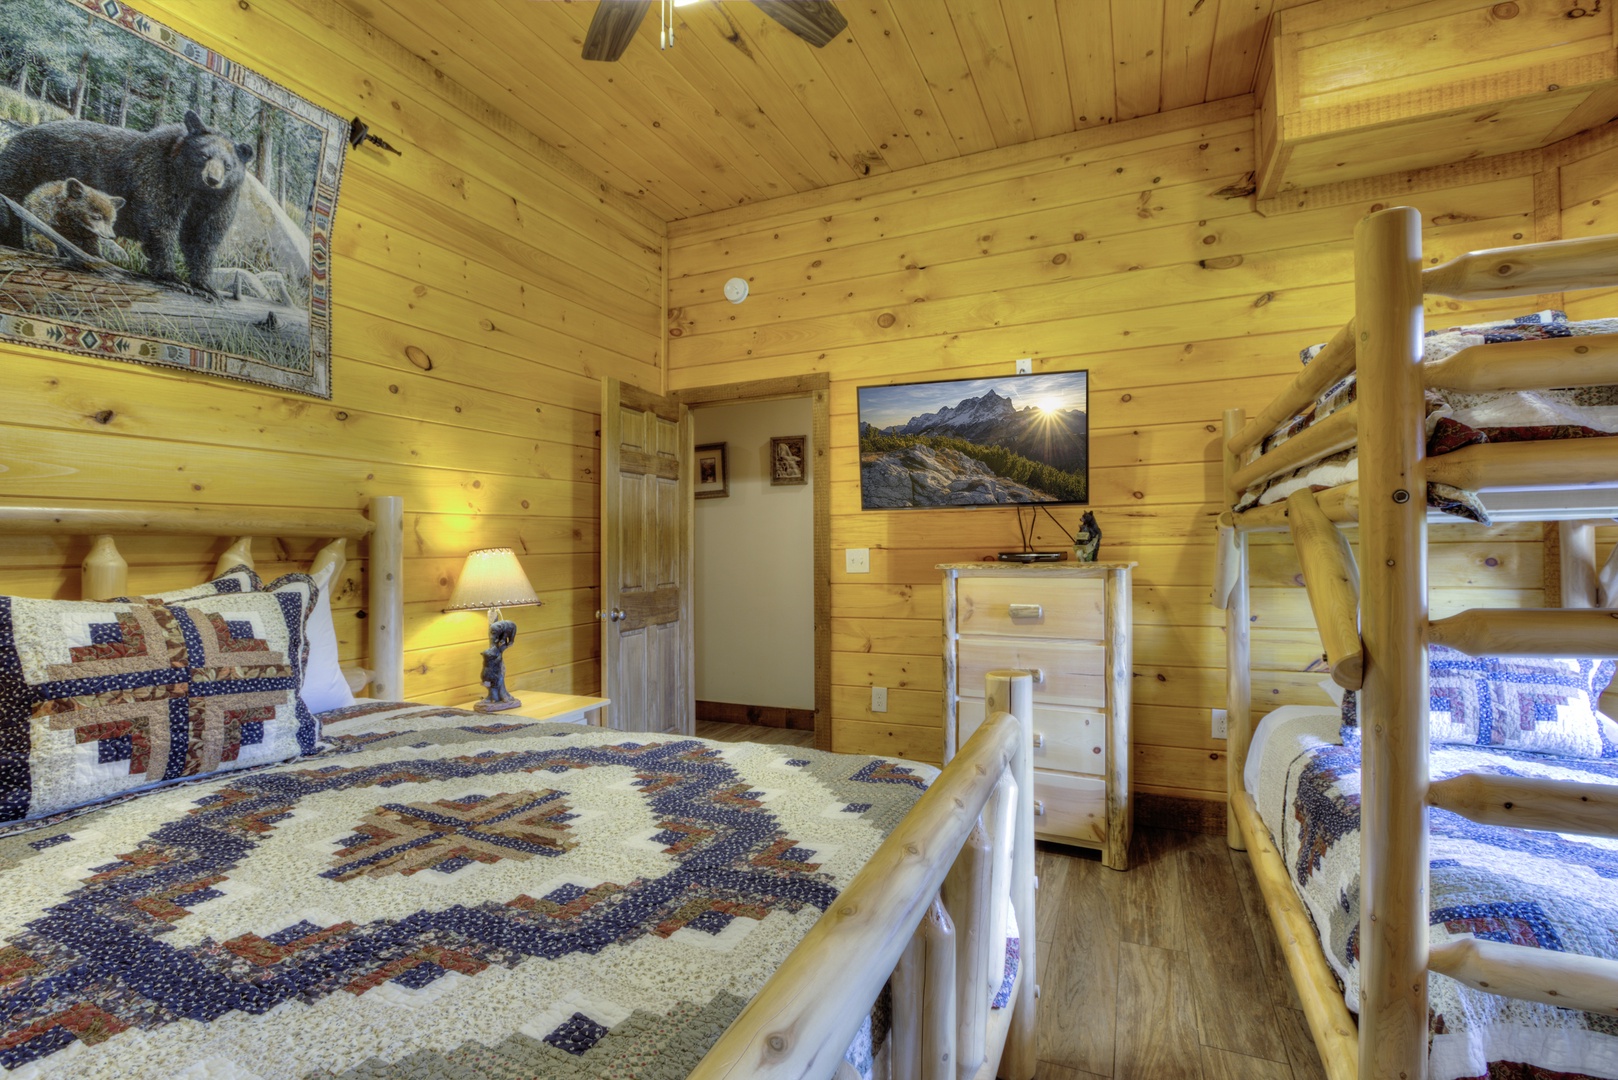 Log furniture in the bedroom at The Best View Lodge, a 5 bedroom cabin rental located in gatlinburg